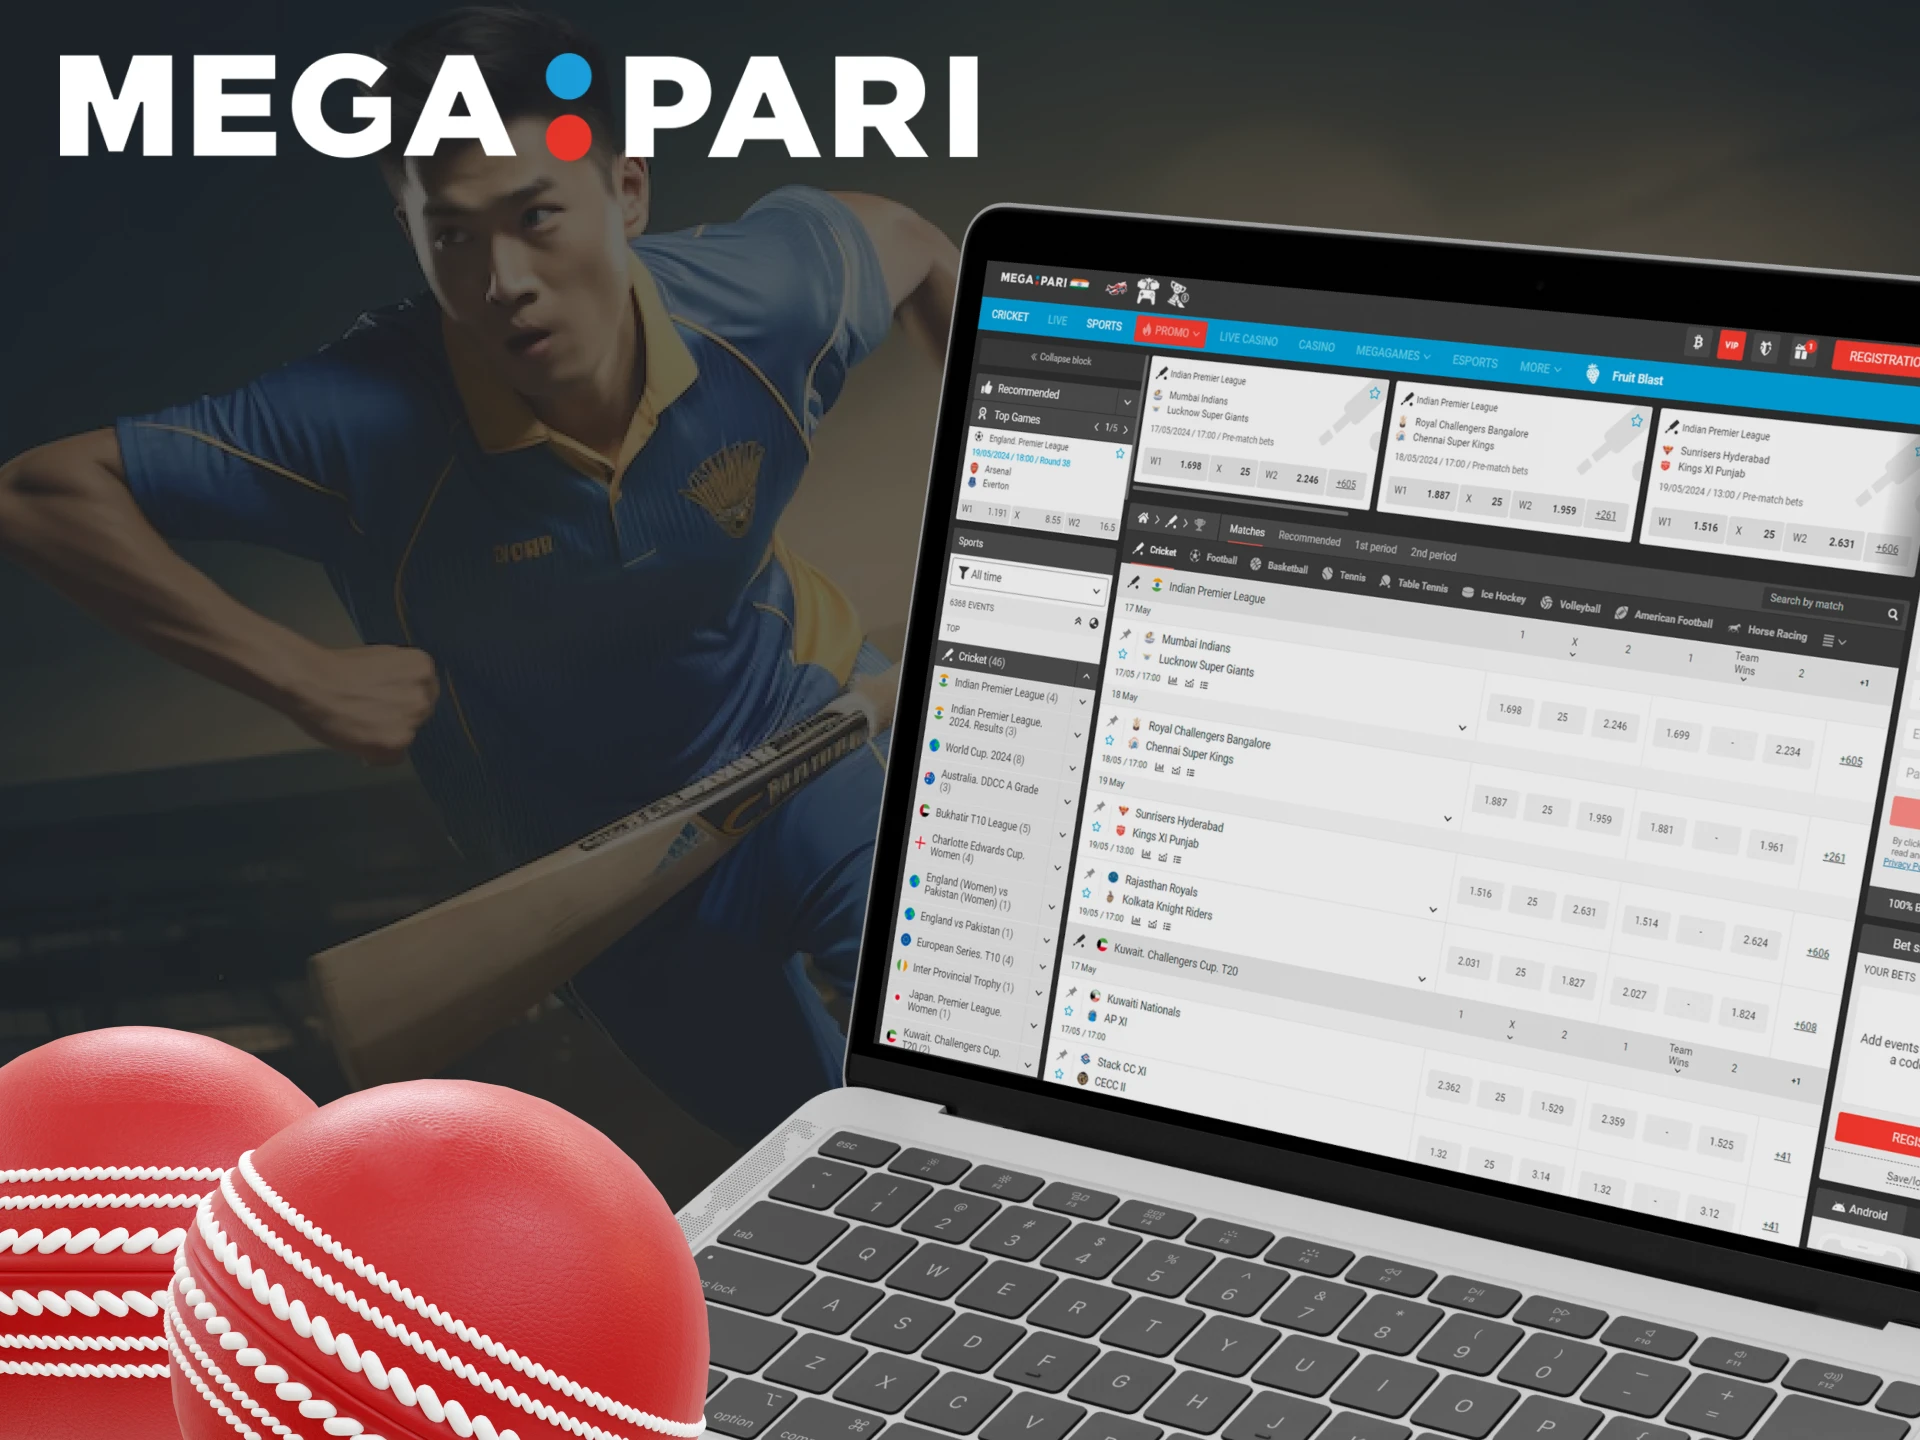 Explore the cricket section of the Megapari website, which offers the best odds and a large number of championships to bet on.